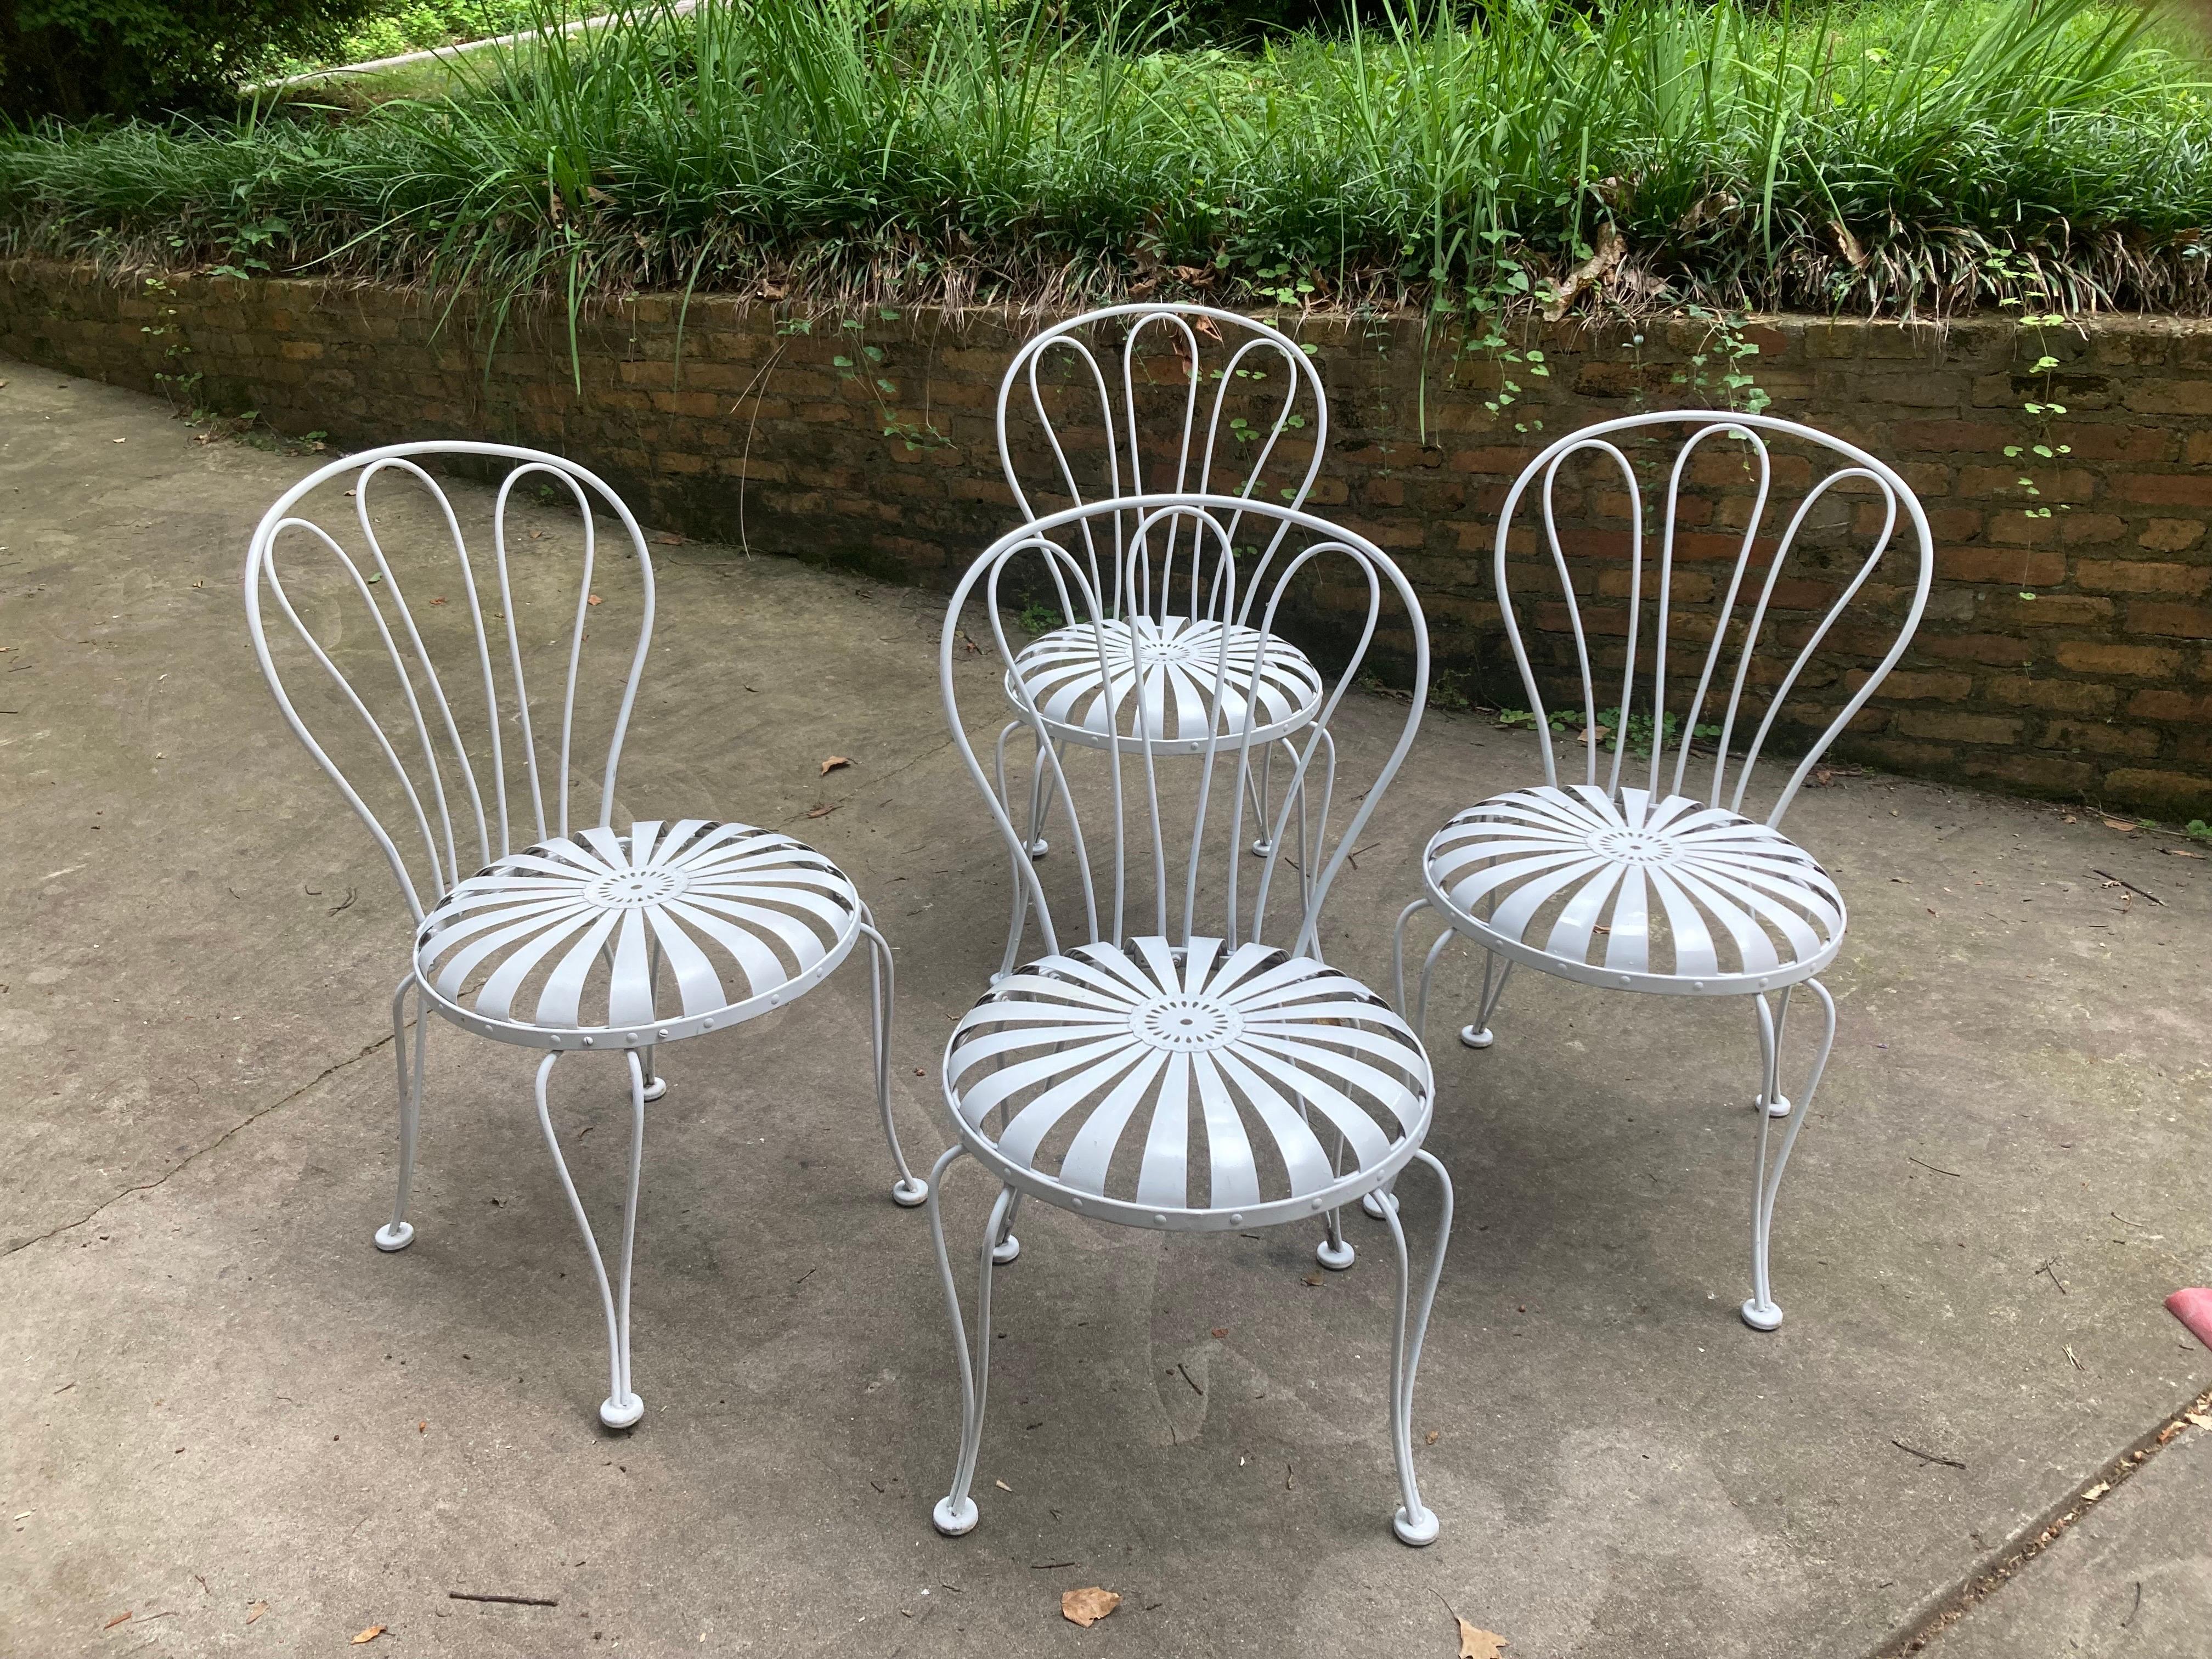 French francois carre garden chairs -
set of 4 For Sale